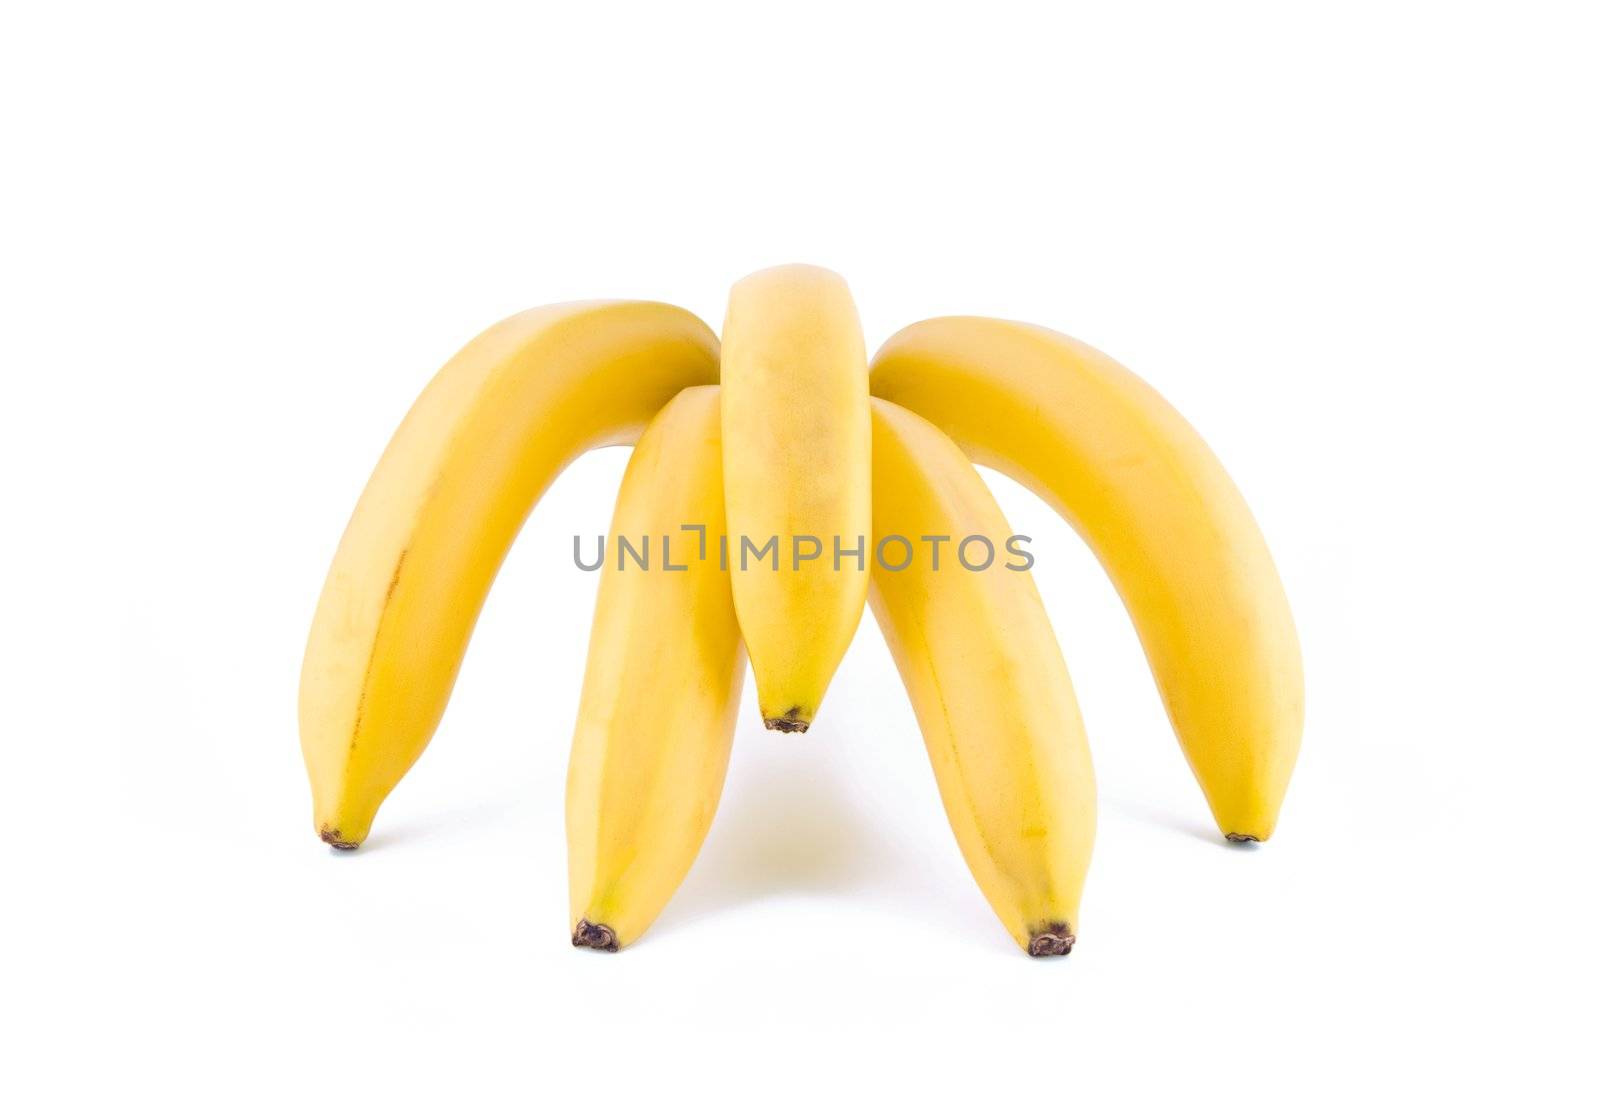 Bunch of five fresh bananas, fruits isolated on white